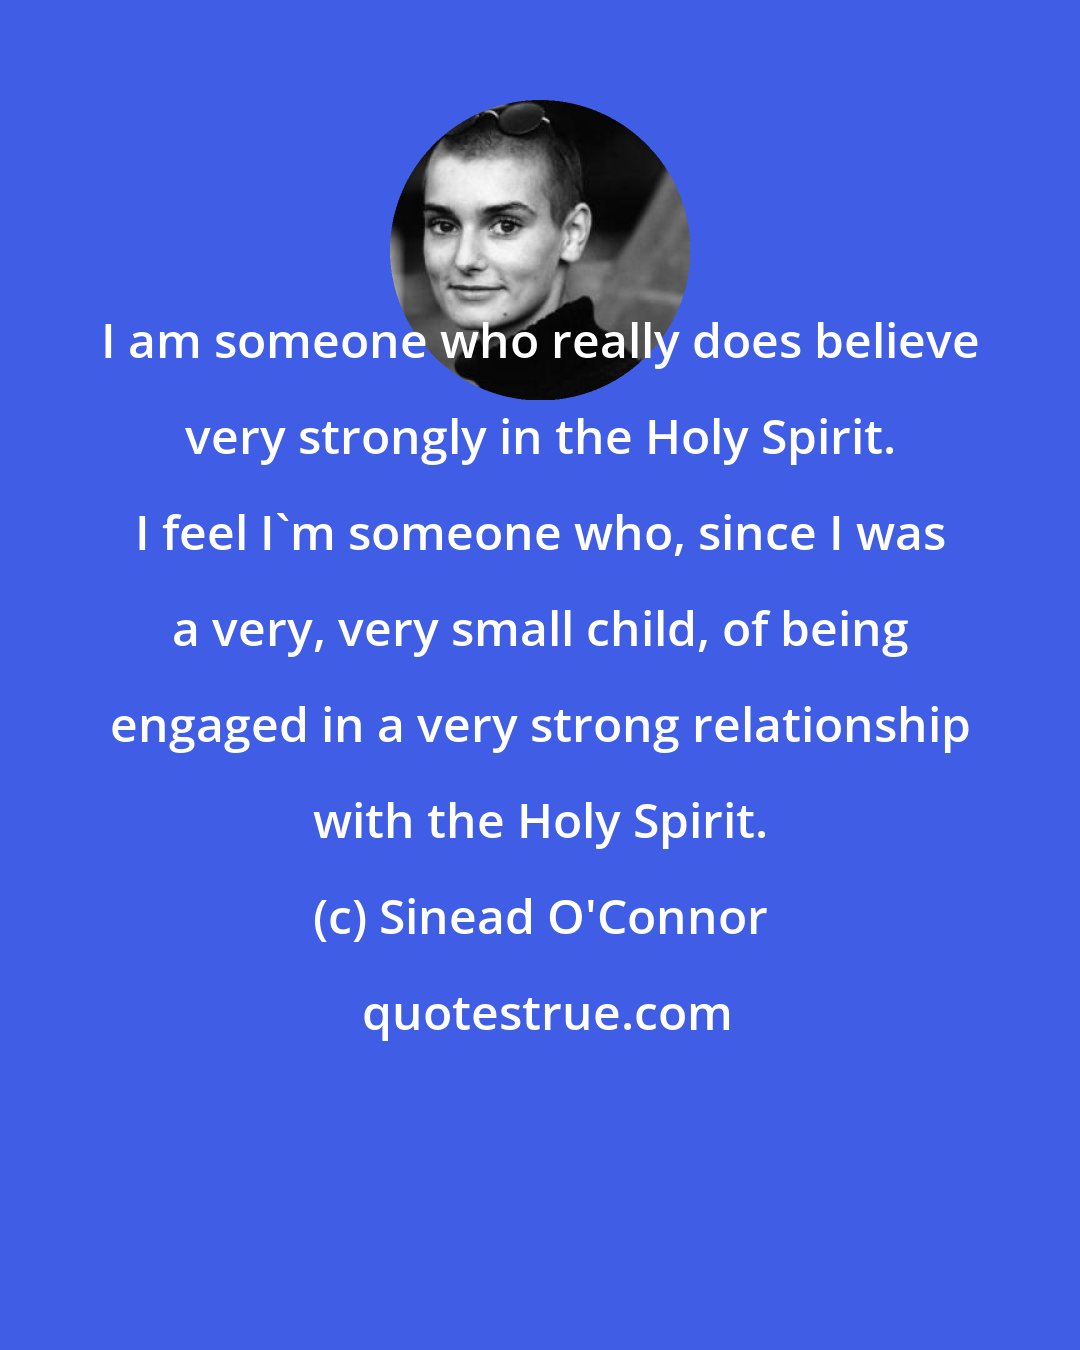 Sinead O'Connor: I am someone who really does believe very strongly in the Holy Spirit. I feel I'm someone who, since I was a very, very small child, of being engaged in a very strong relationship with the Holy Spirit.